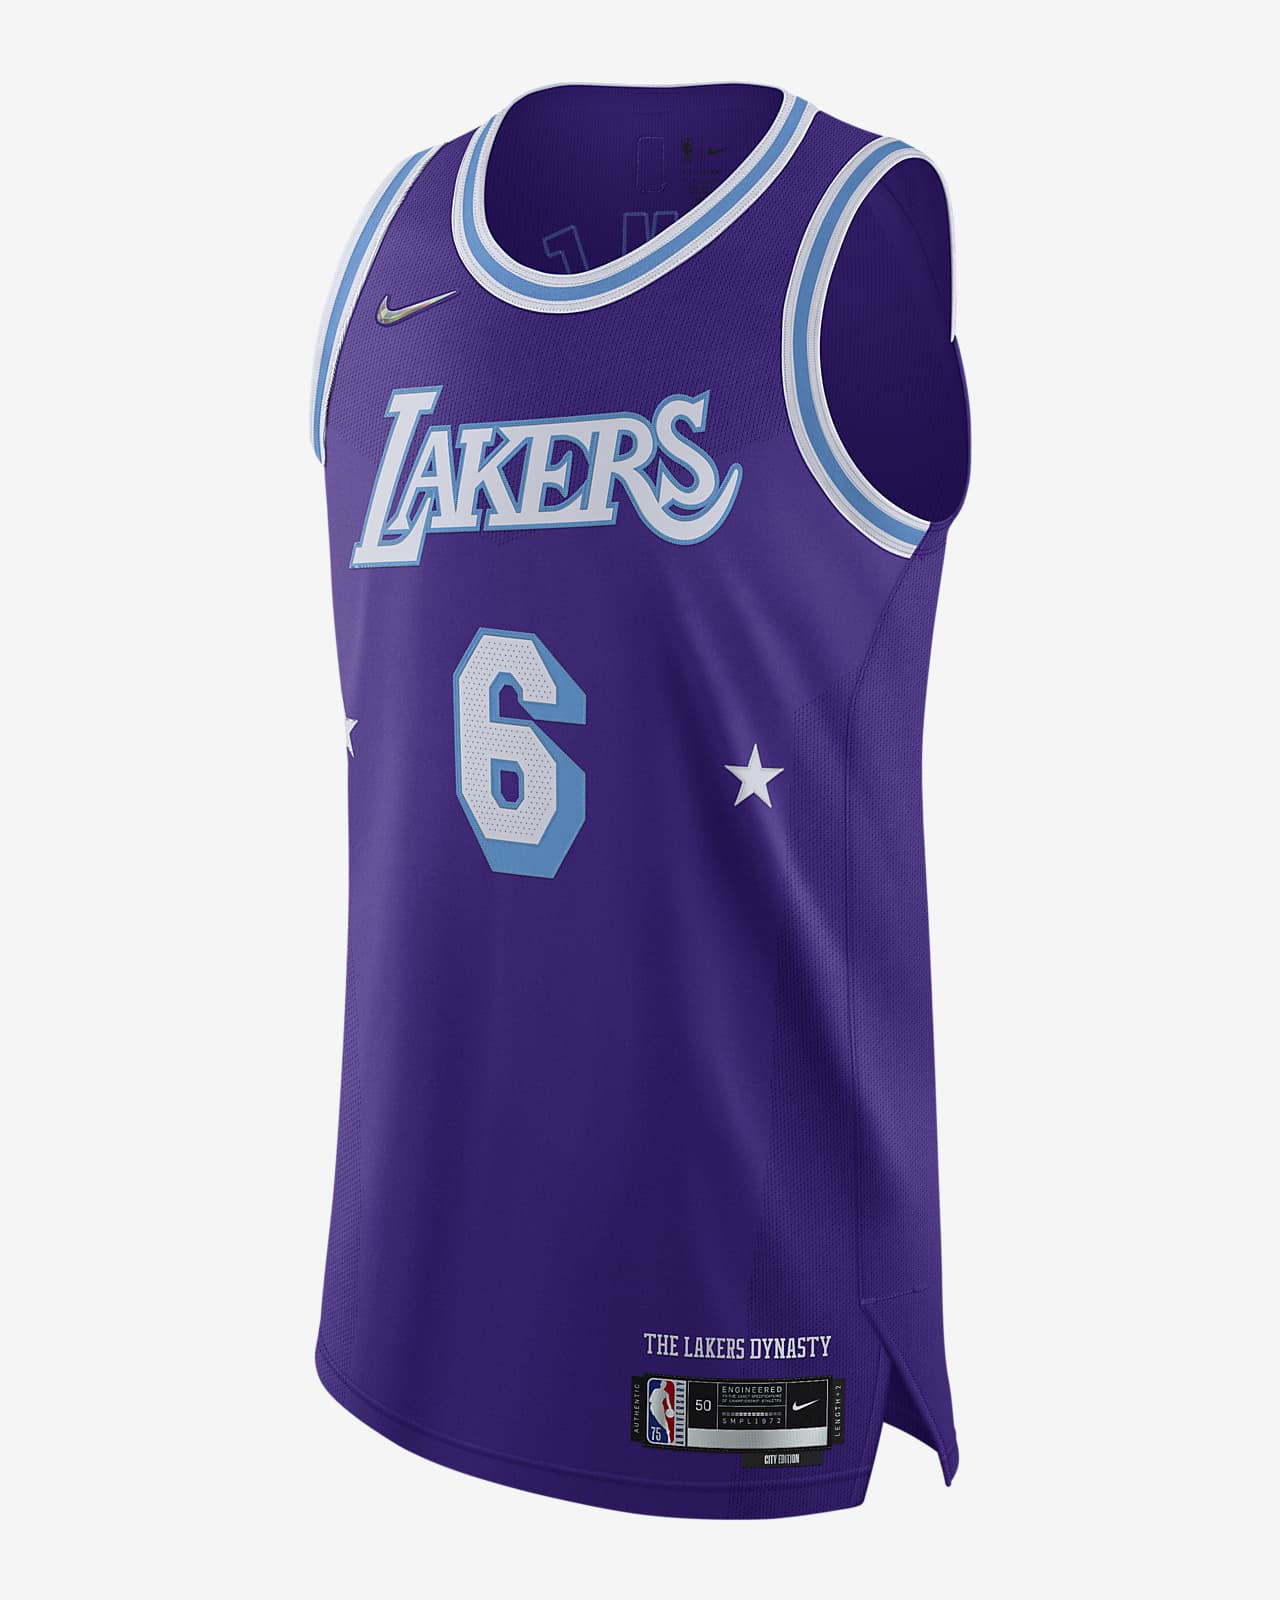 Jersey Los Angeles Lakers City Edition Nike Dri-FIT ADV NBA Authentic